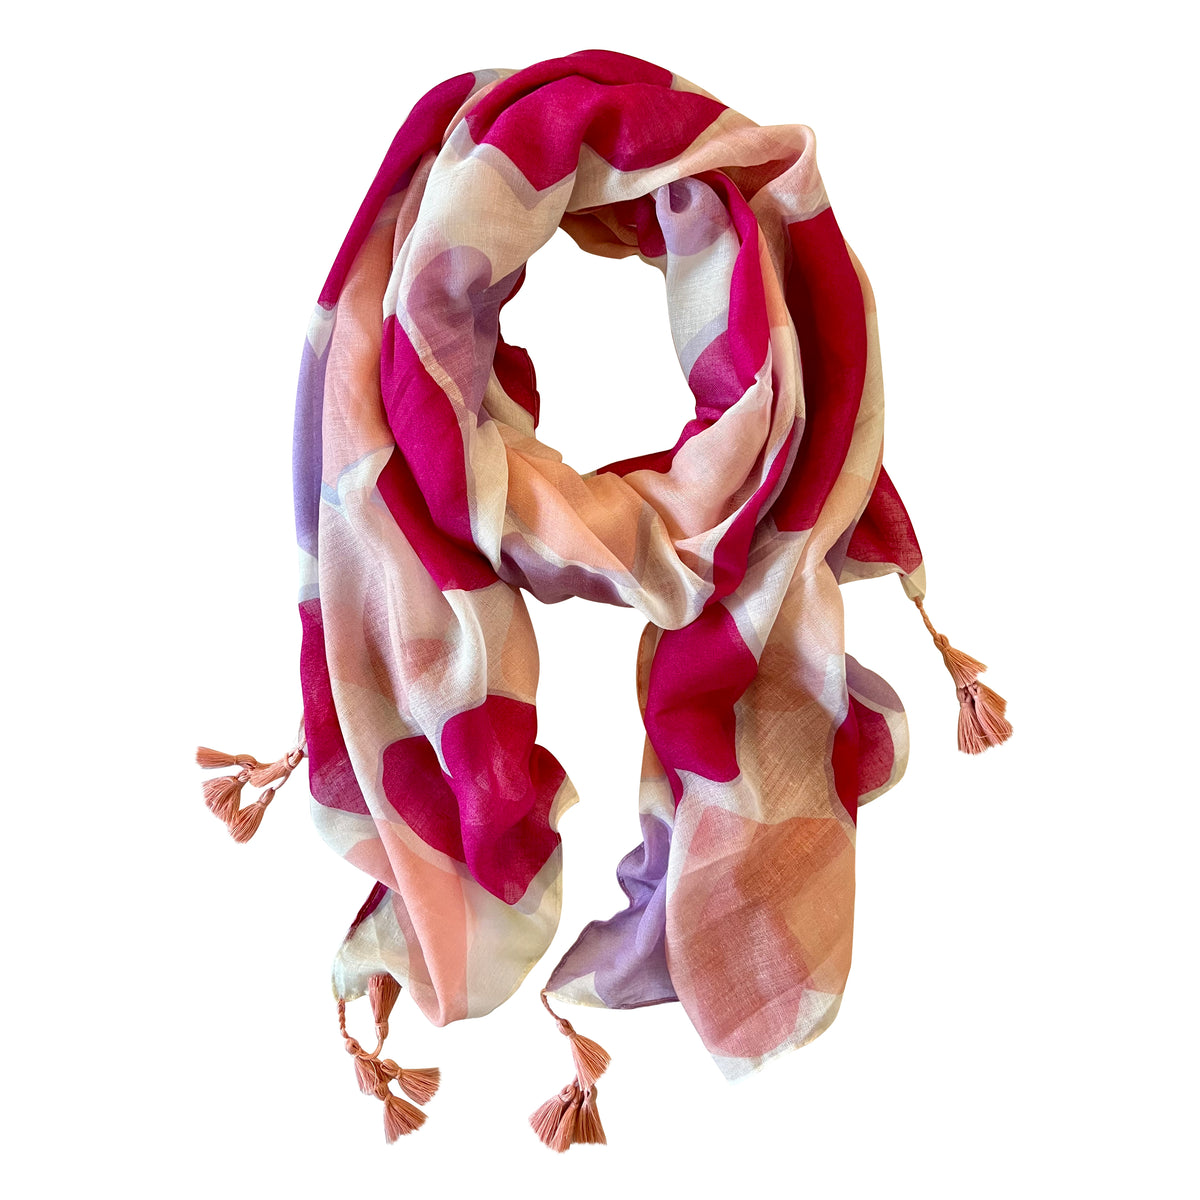 Fall in love with our Love Heart Scarf! It's lightweight, perfect for year-round wear, and features charming pink tassels on each corner for a little added texture. The white base adorned with pink and lilac hearts adds a touch of sweetness to any outfit. What's not to love!